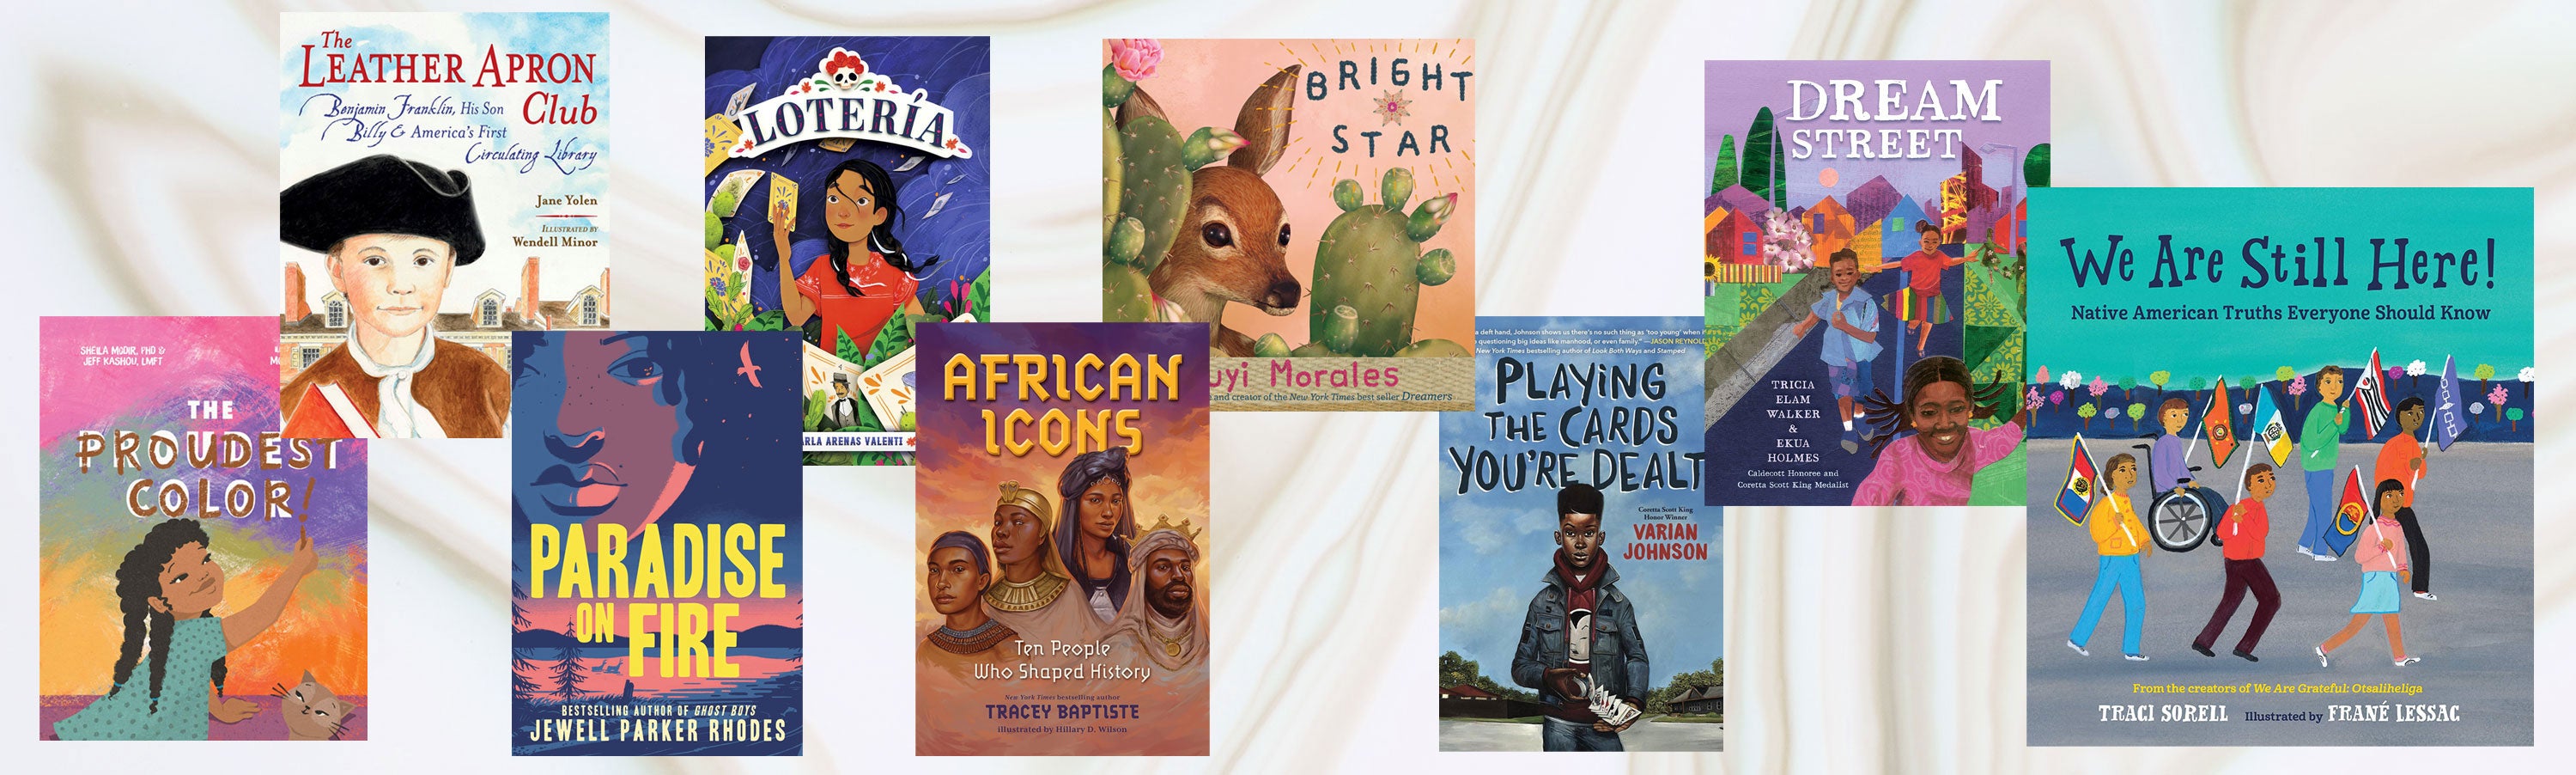 Children's Book Fest header image with featured books